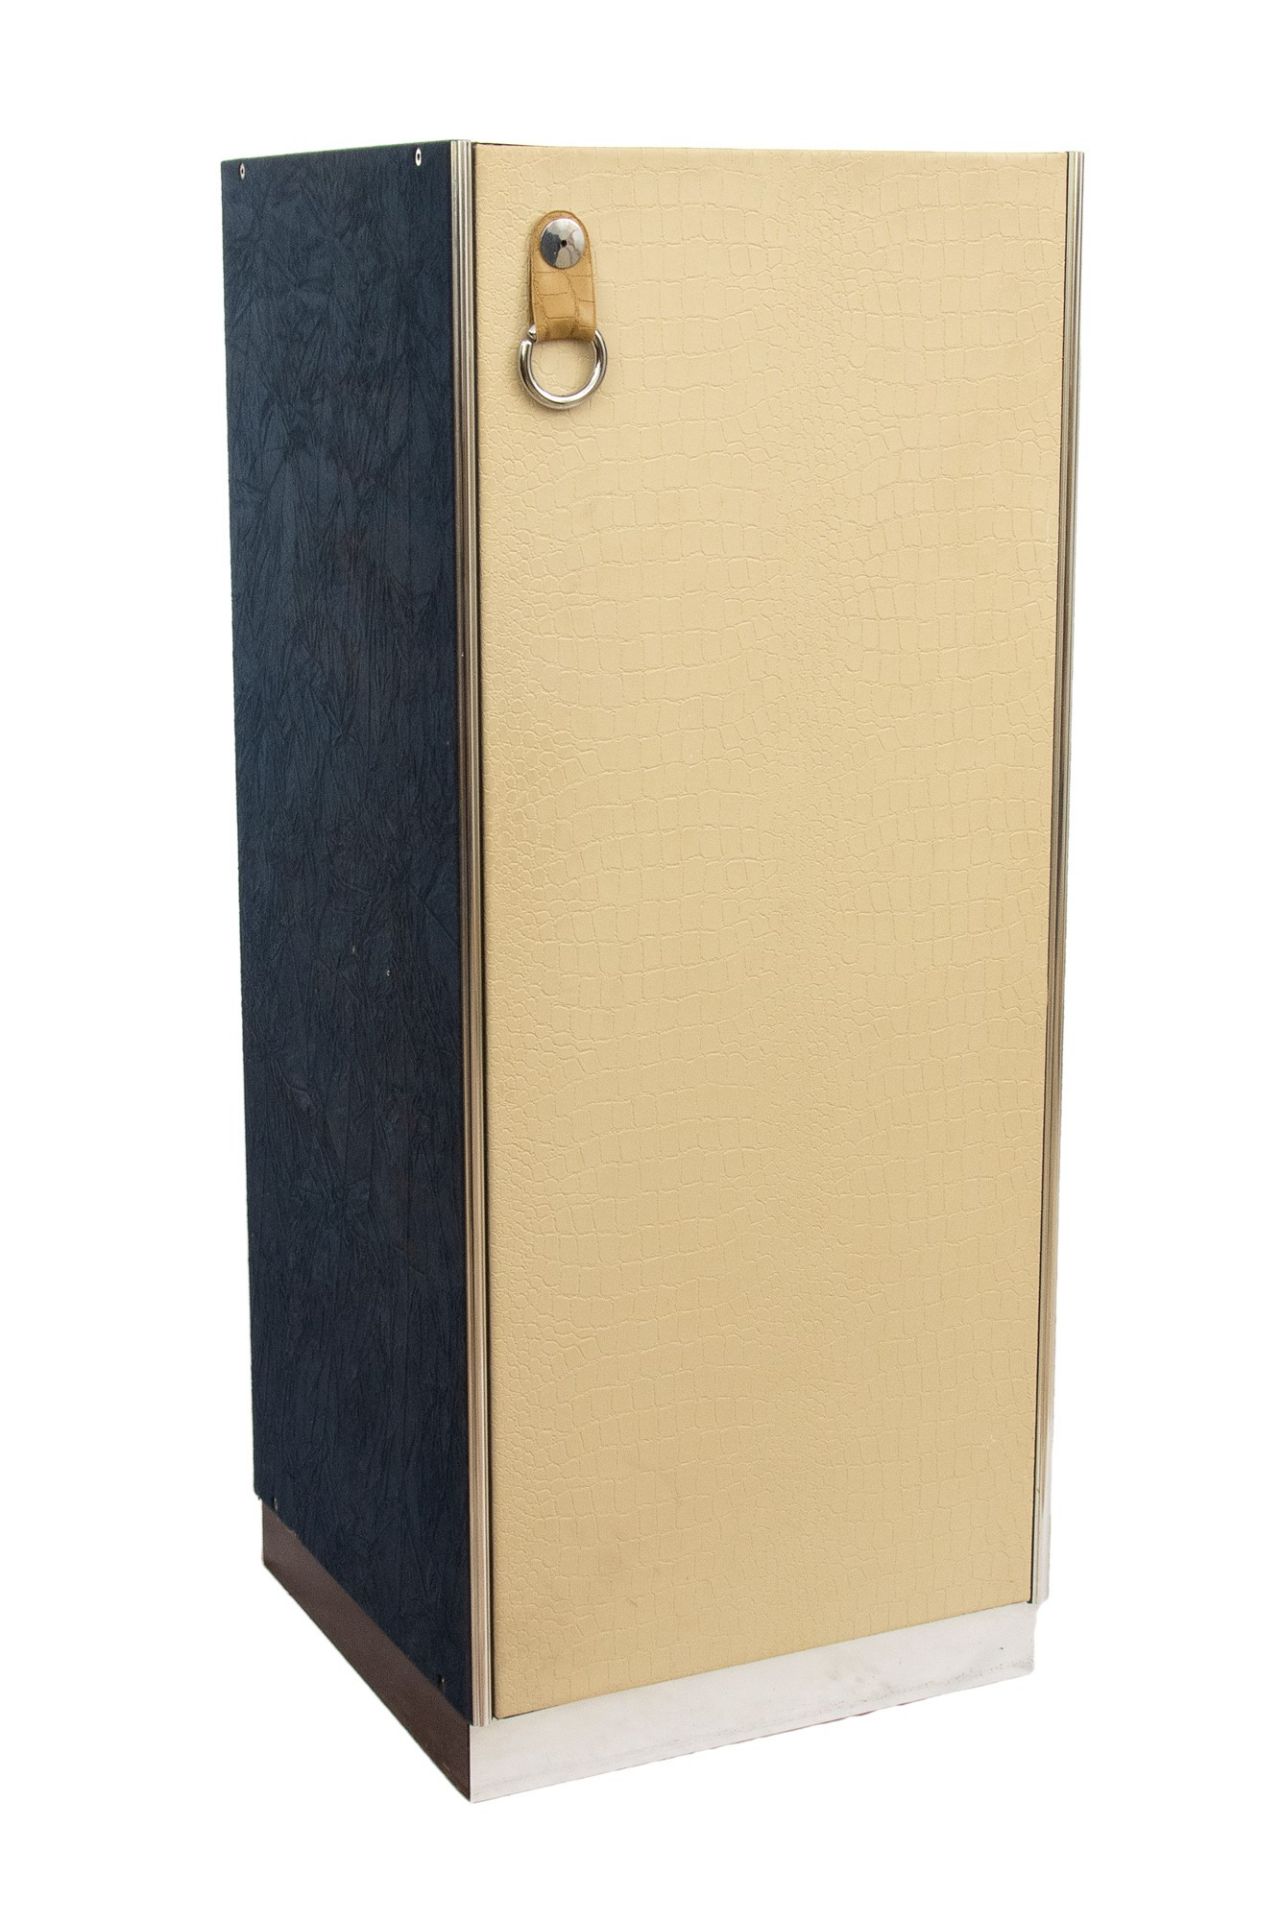 Guido Faleschini 4 modules wooden wardrobe covered in blue suede and white leather. Steel handles - Image 3 of 11